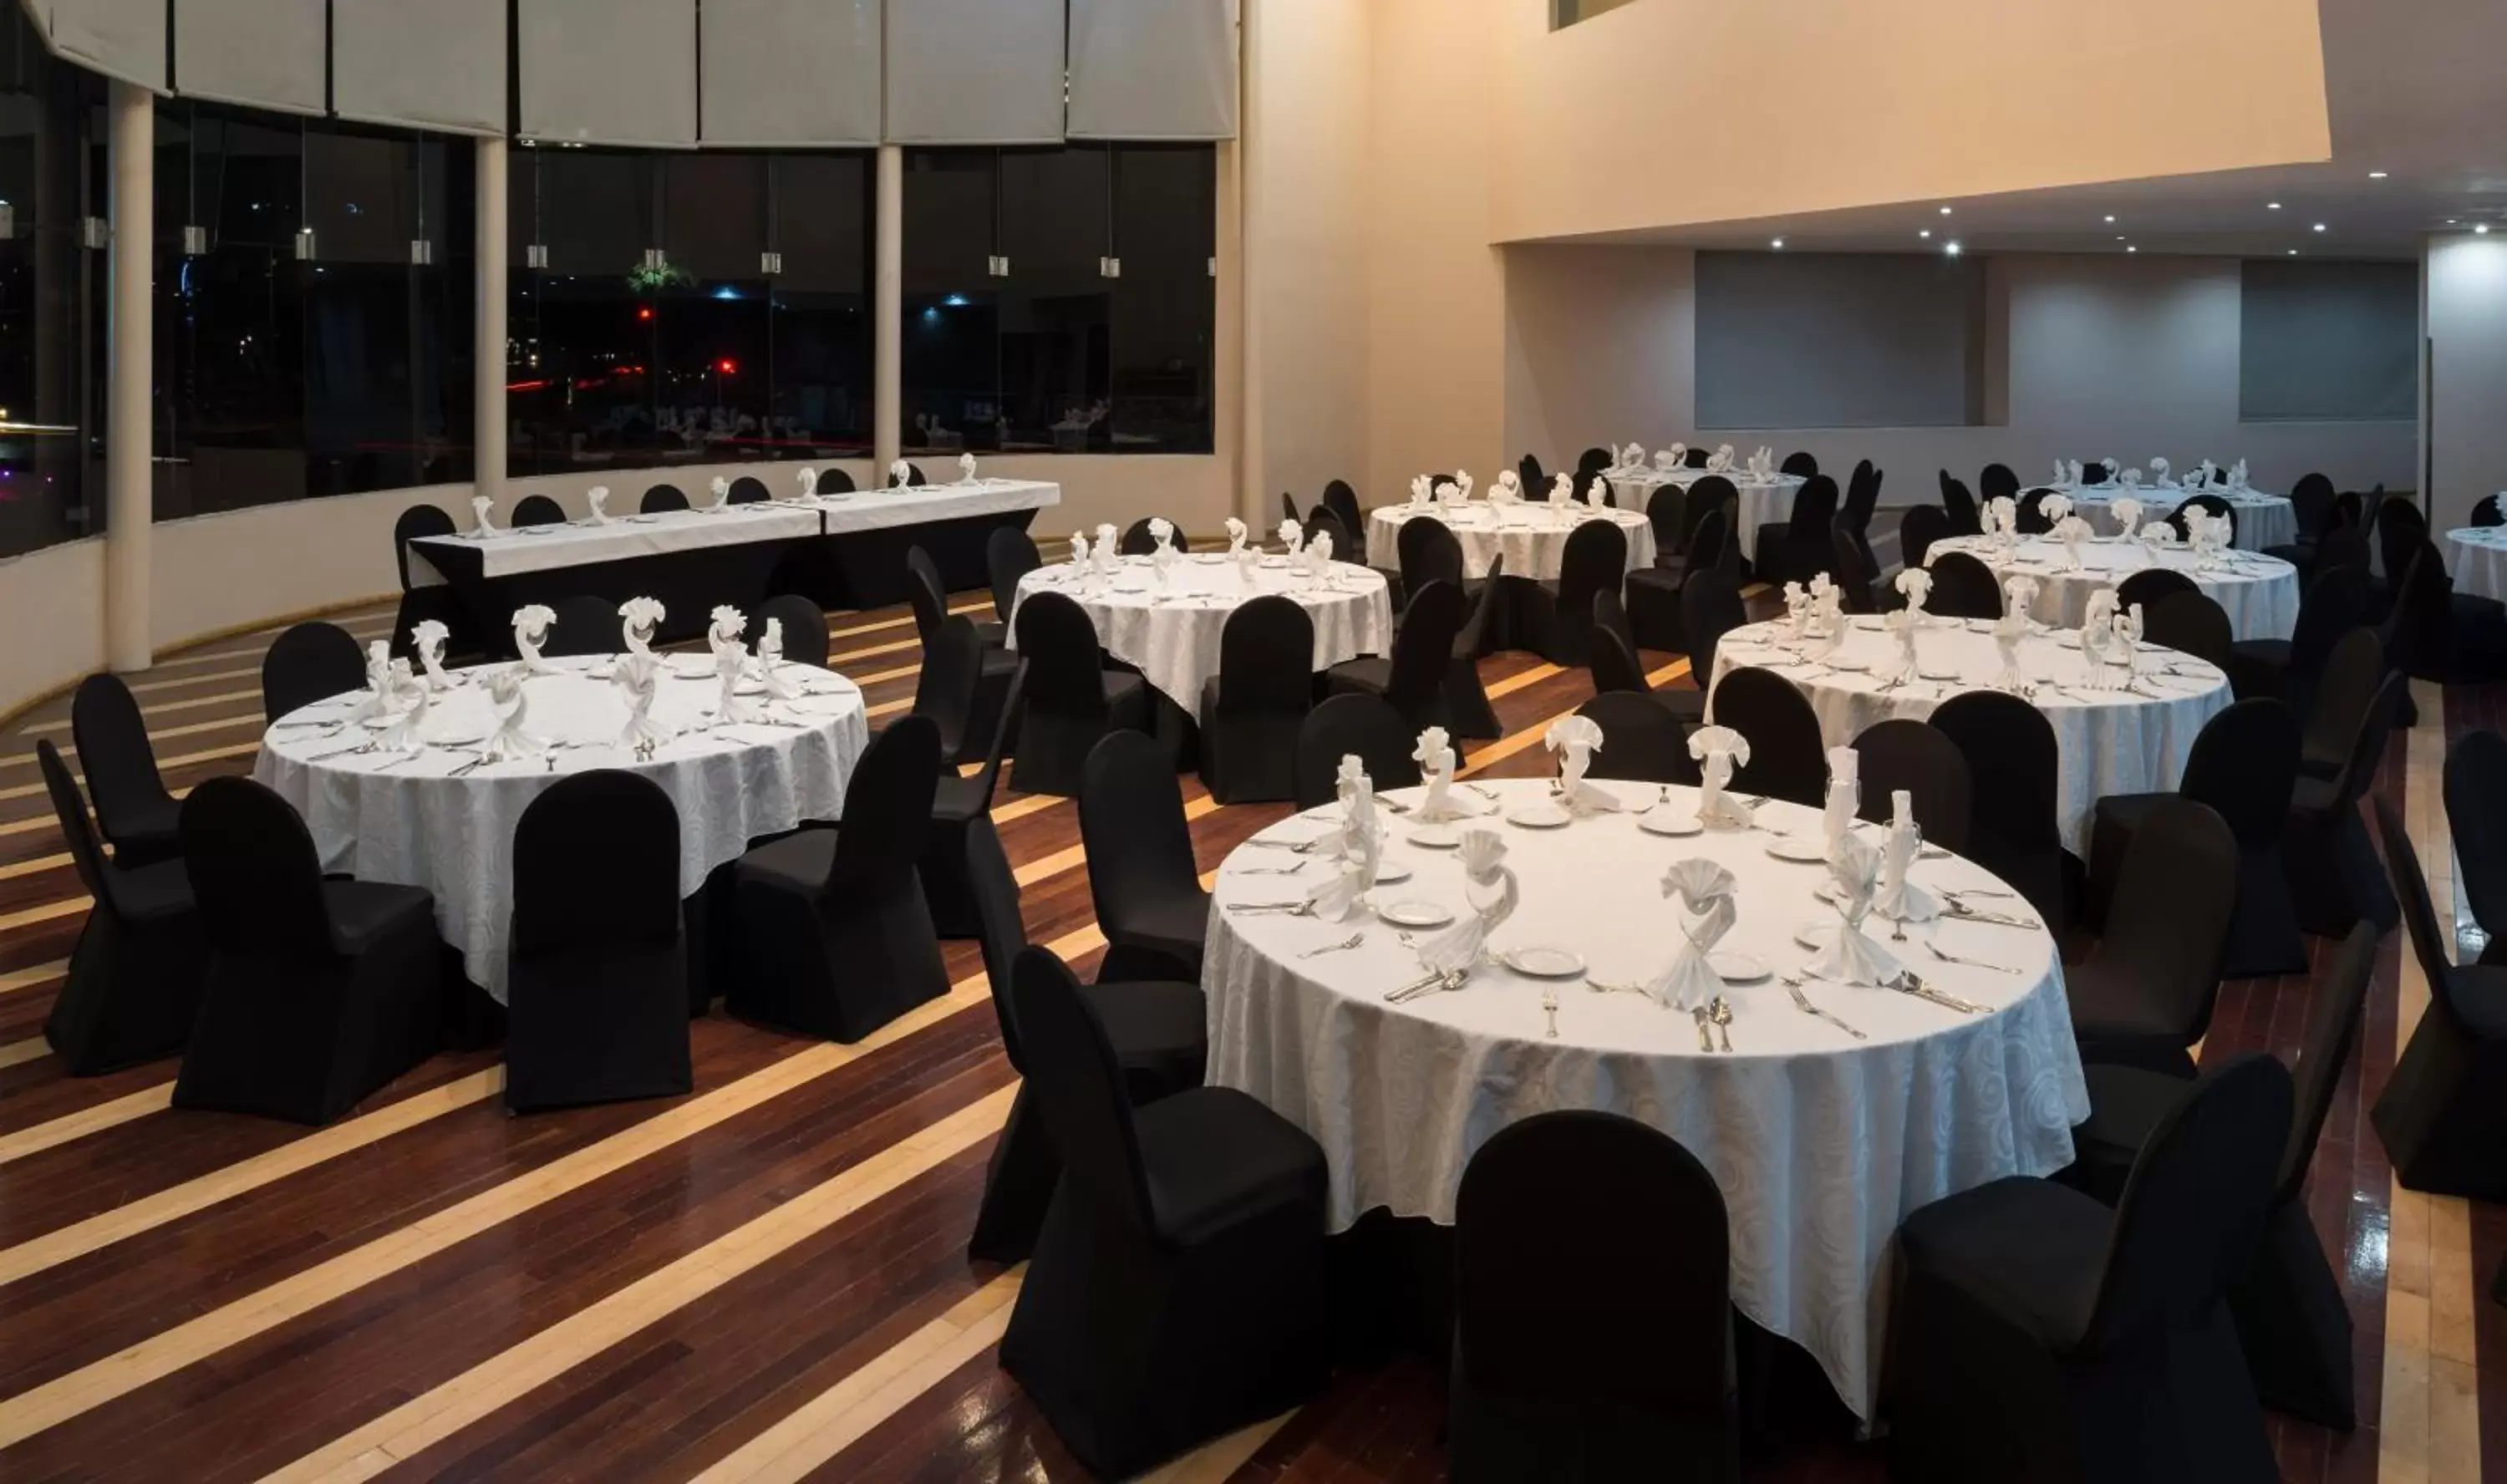 Meeting/conference room, Banquet Facilities in Real Inn Tijuana by Camino Real Hotels